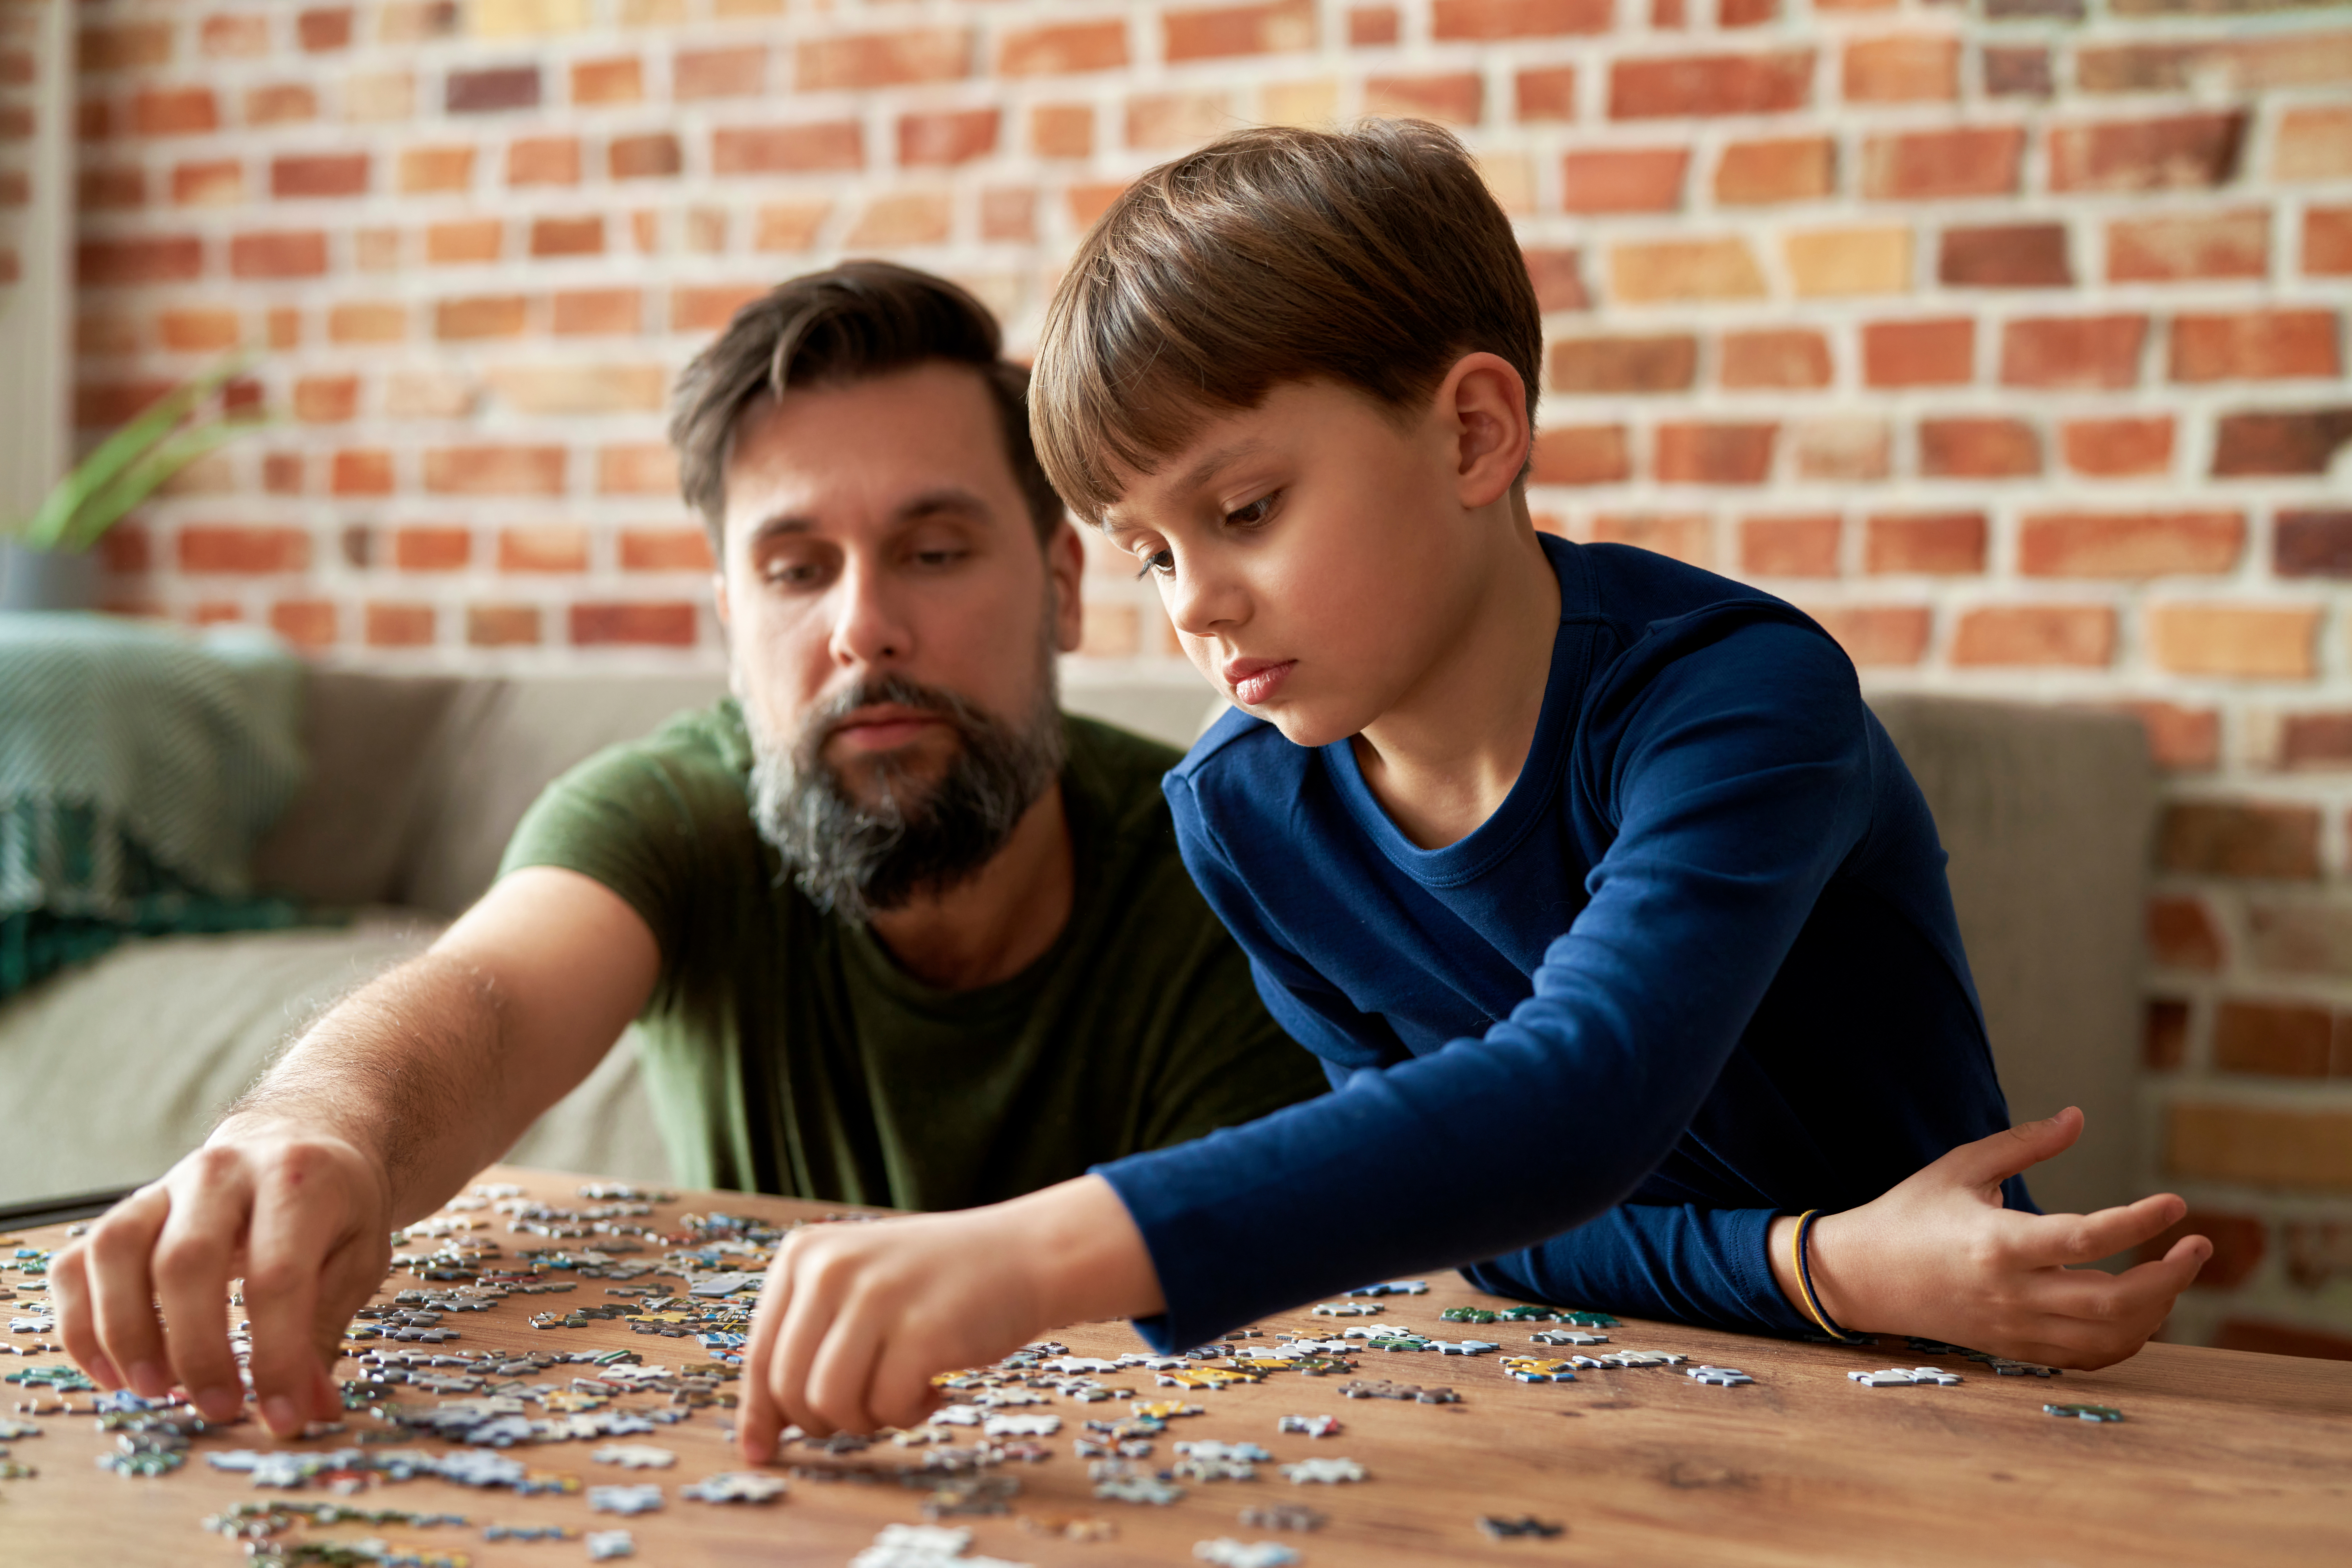 A father and son deep in concentration as they try to connect the pieces of a challenging jigsaw puzzle